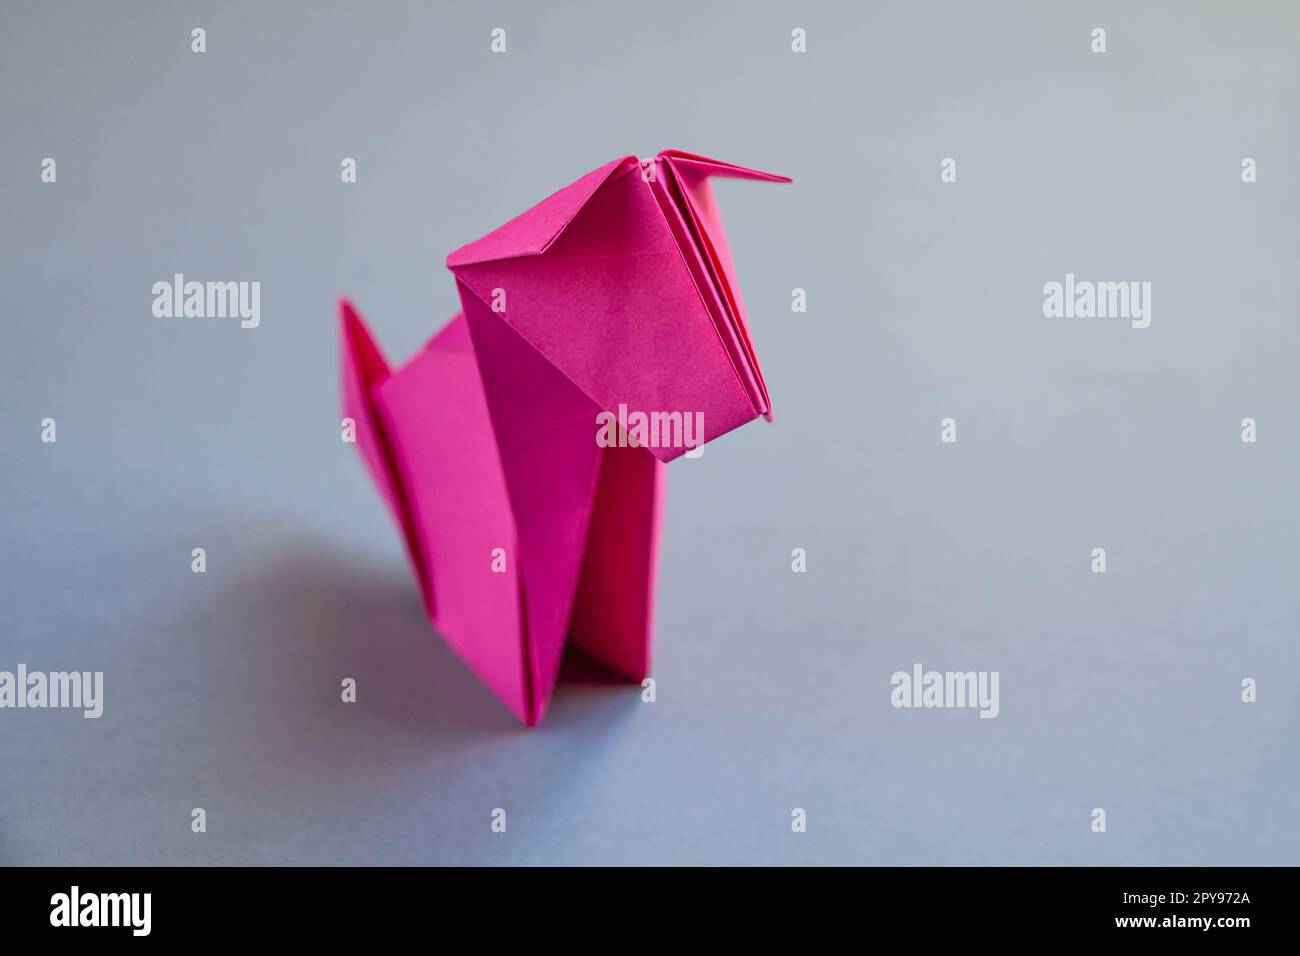 Pink paper dog origami isolated on a grey background Stock Photo